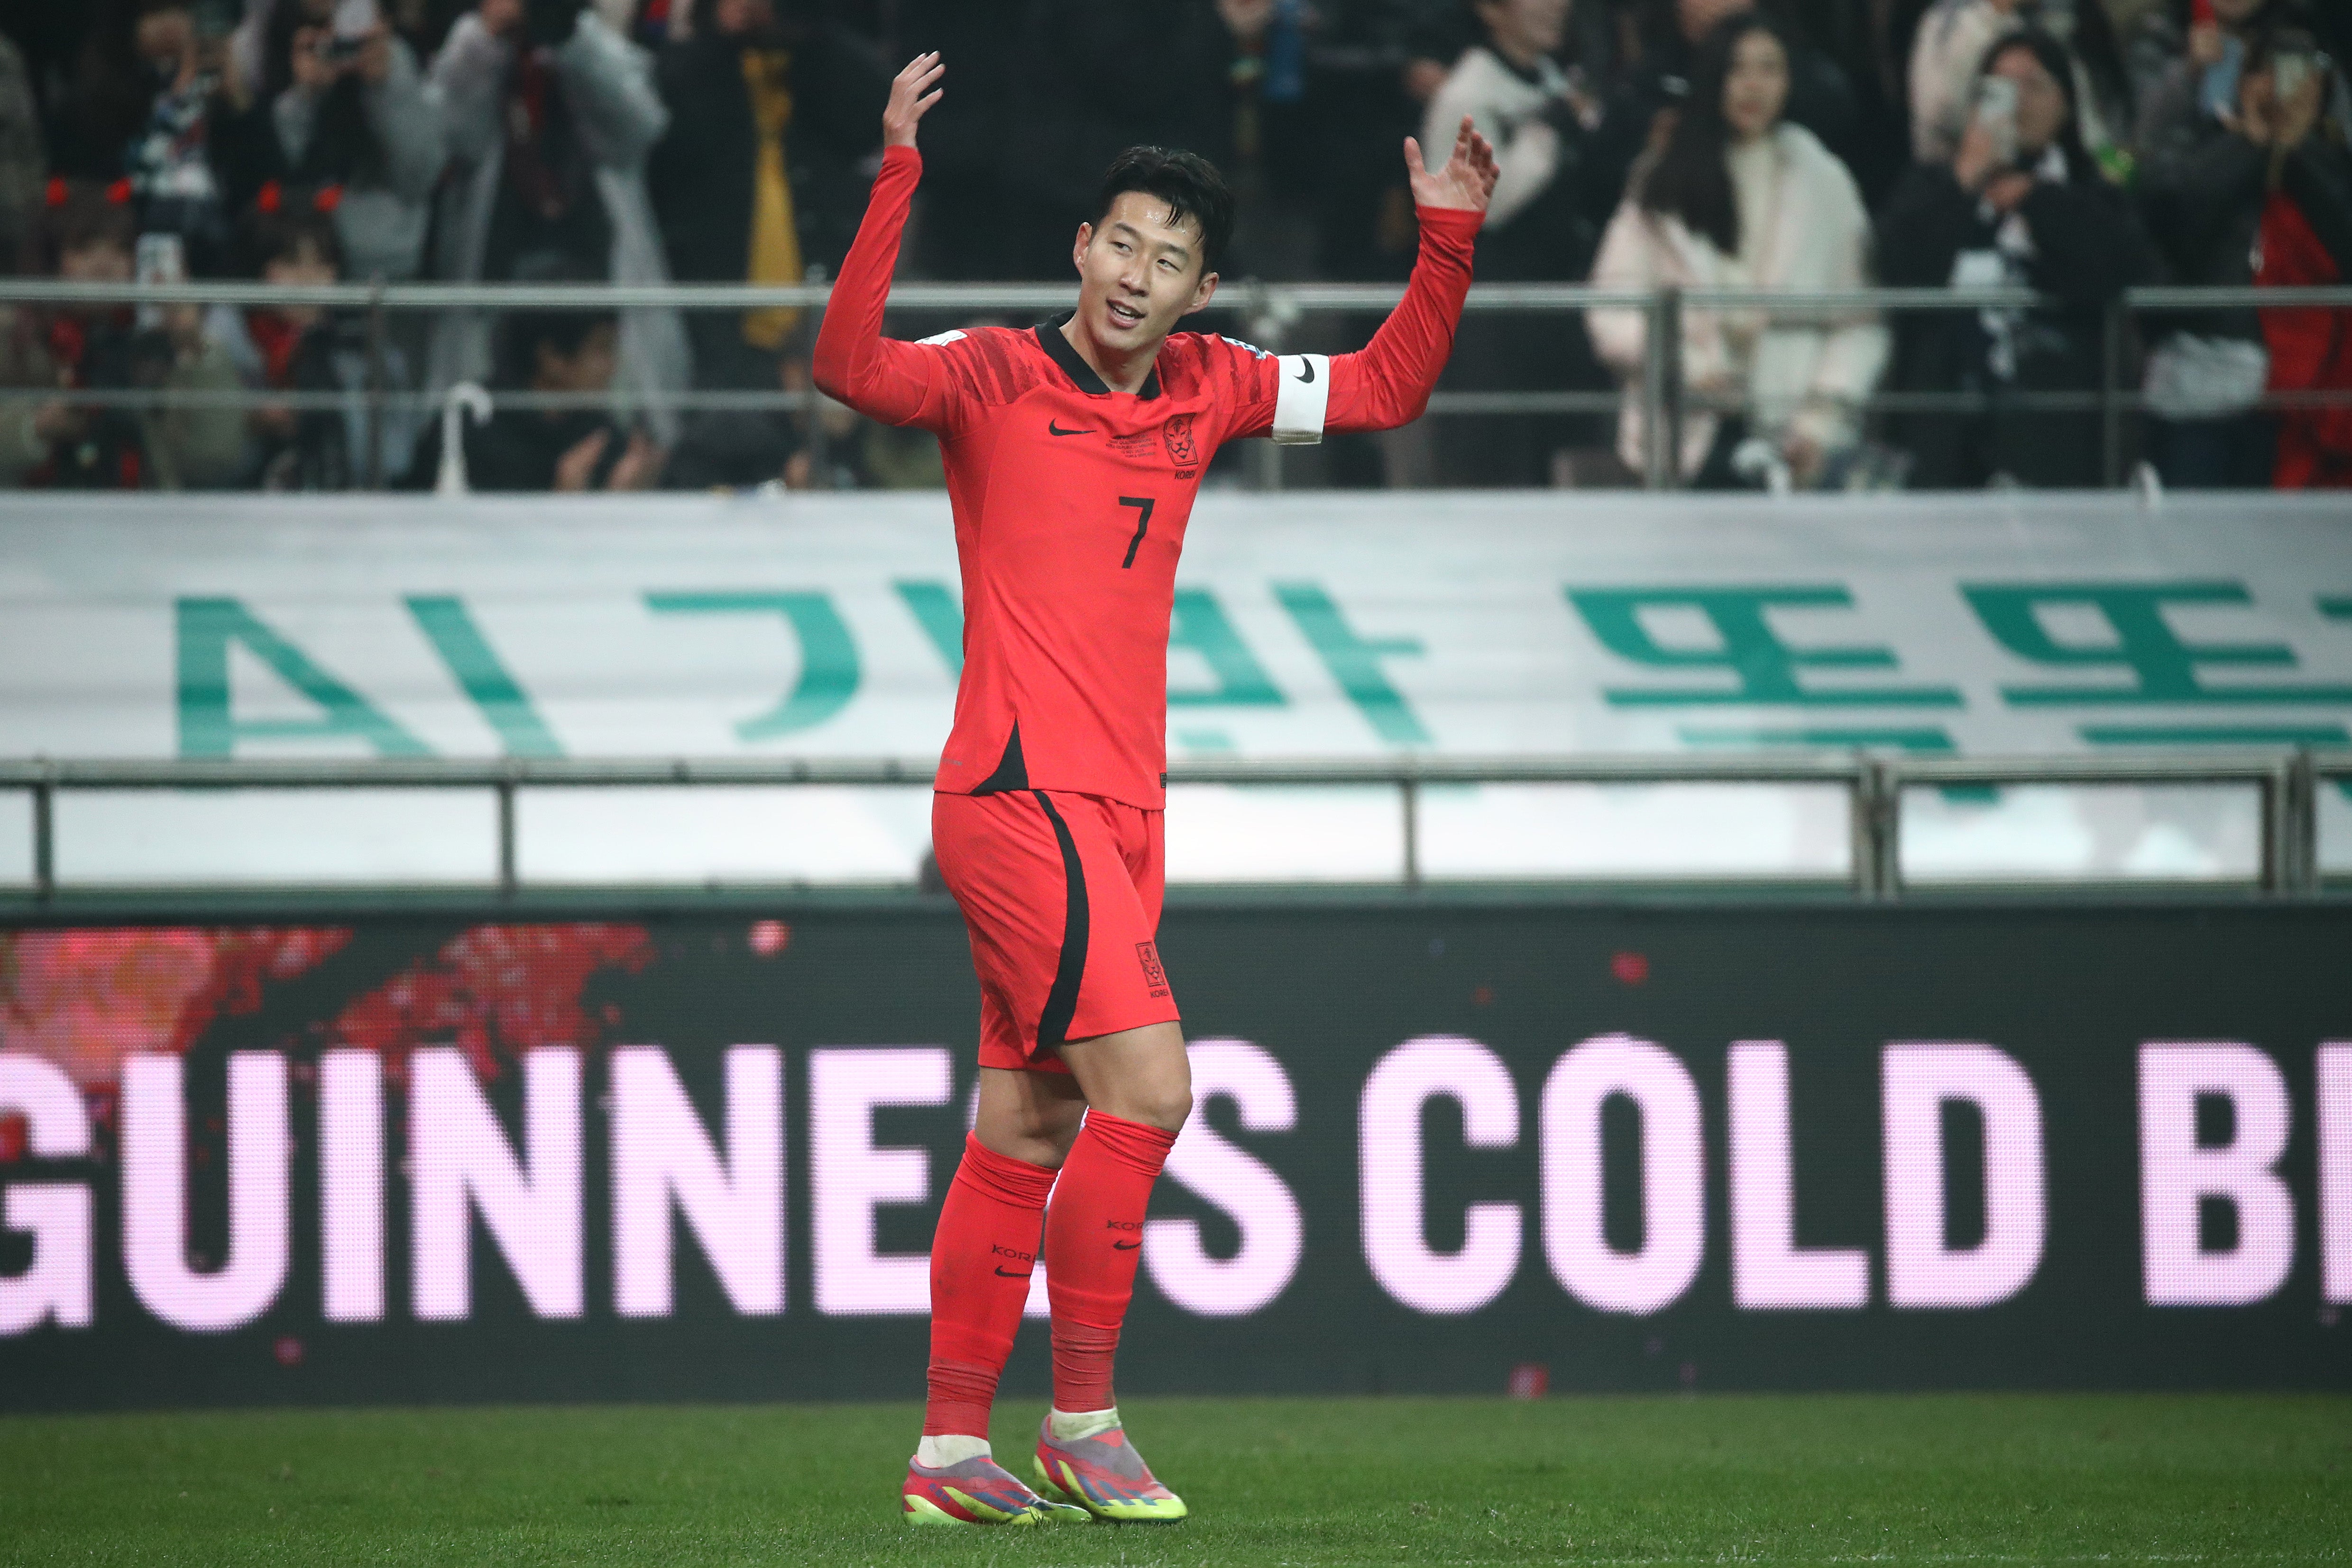 Son Heung-min hit a brace for South Korea to boost their World Cup qualifying